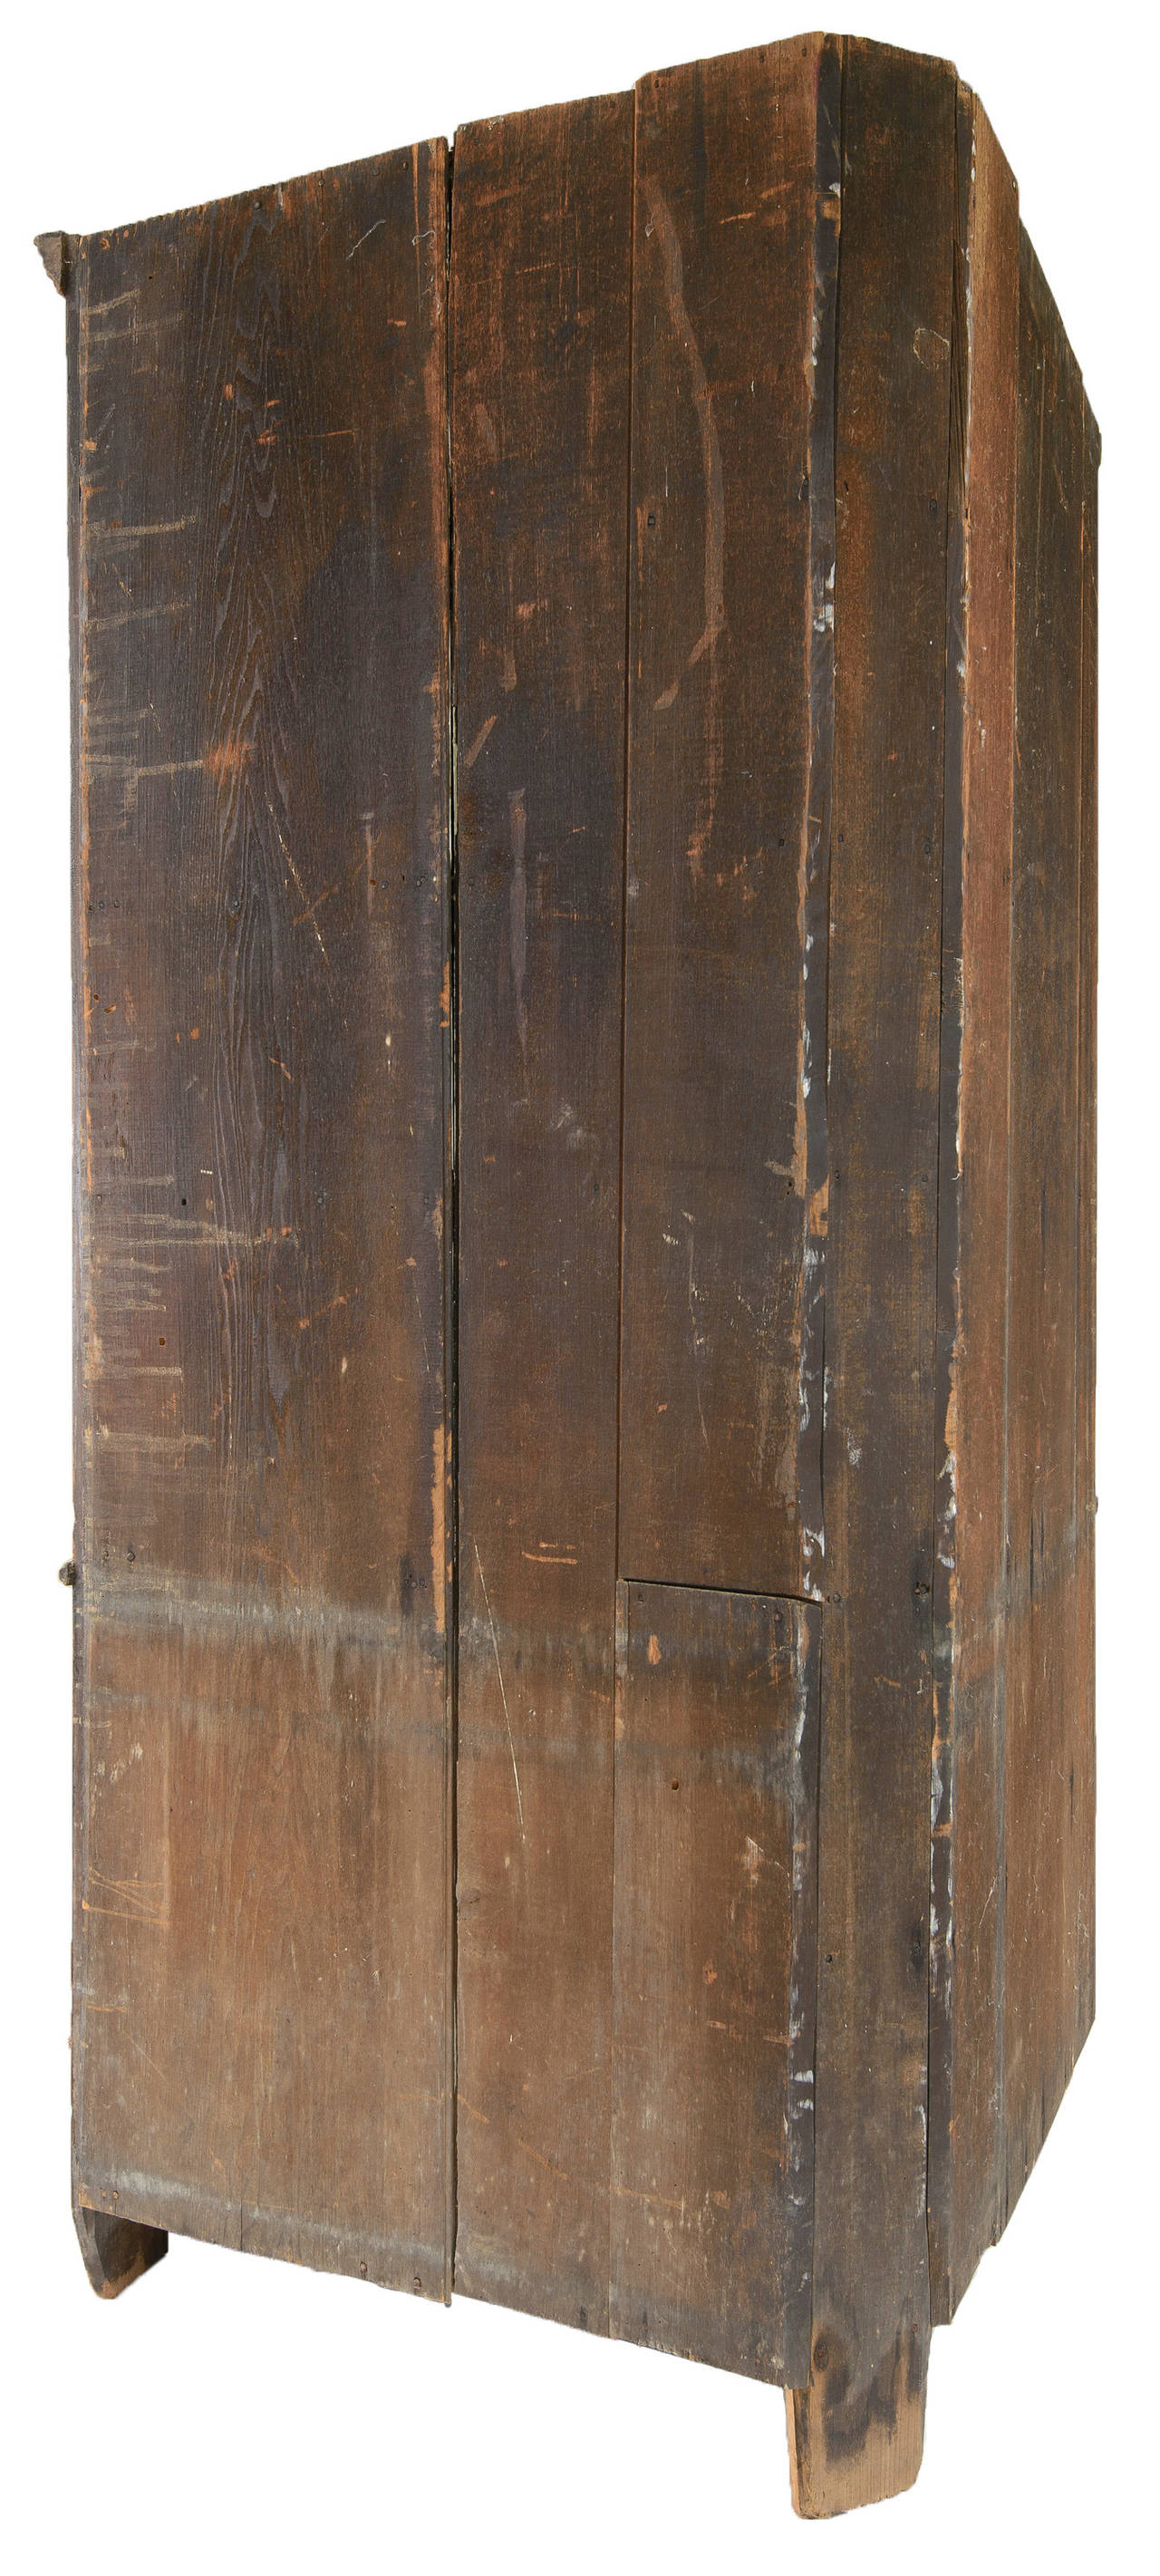 Hand-Crafted 19th Century American Corner Cupboard